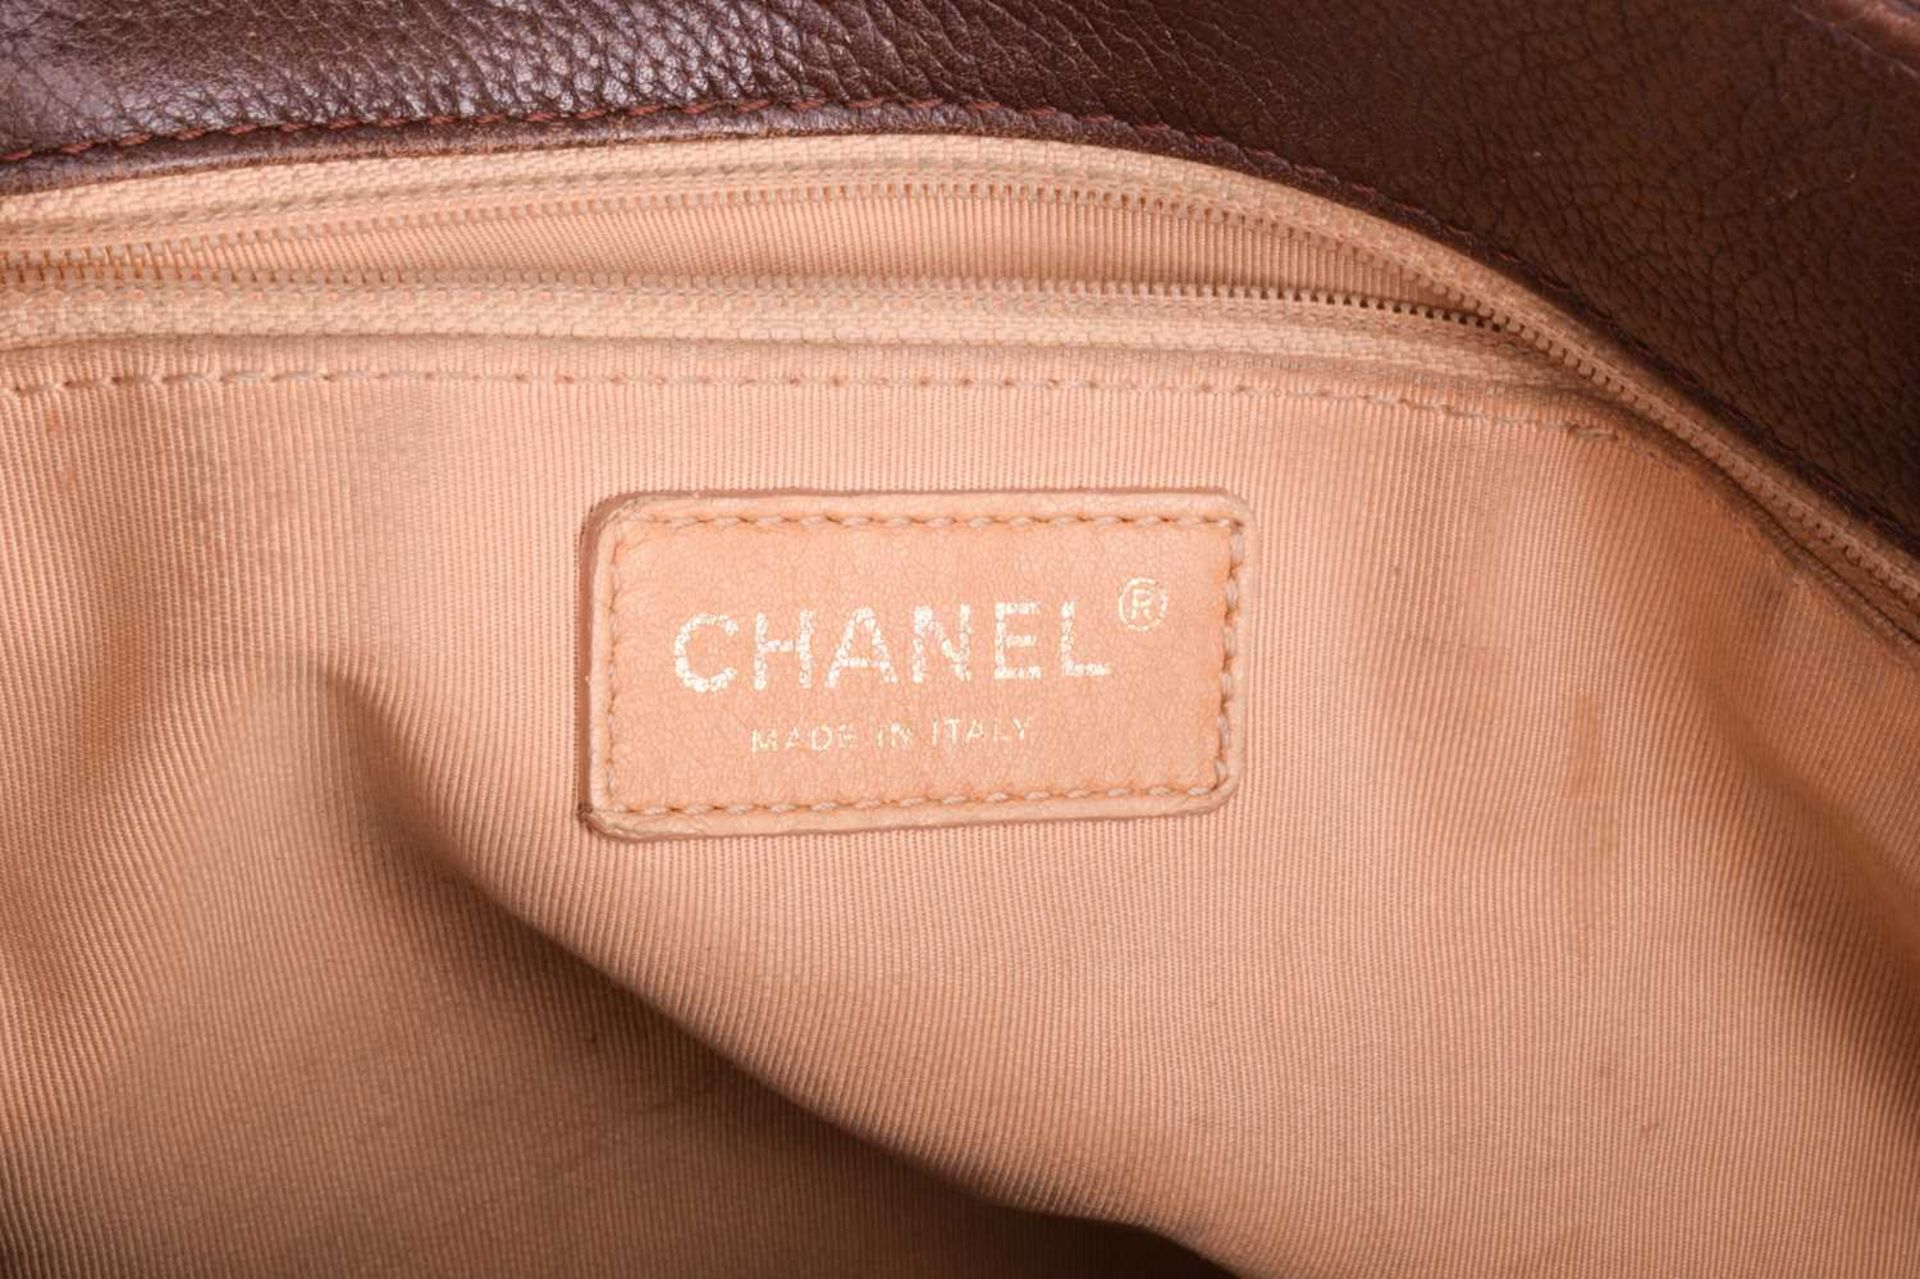 Chanel - an Executive tote bag in hazelnut brown grained leather, circa 1989, constructed with - Image 6 of 10